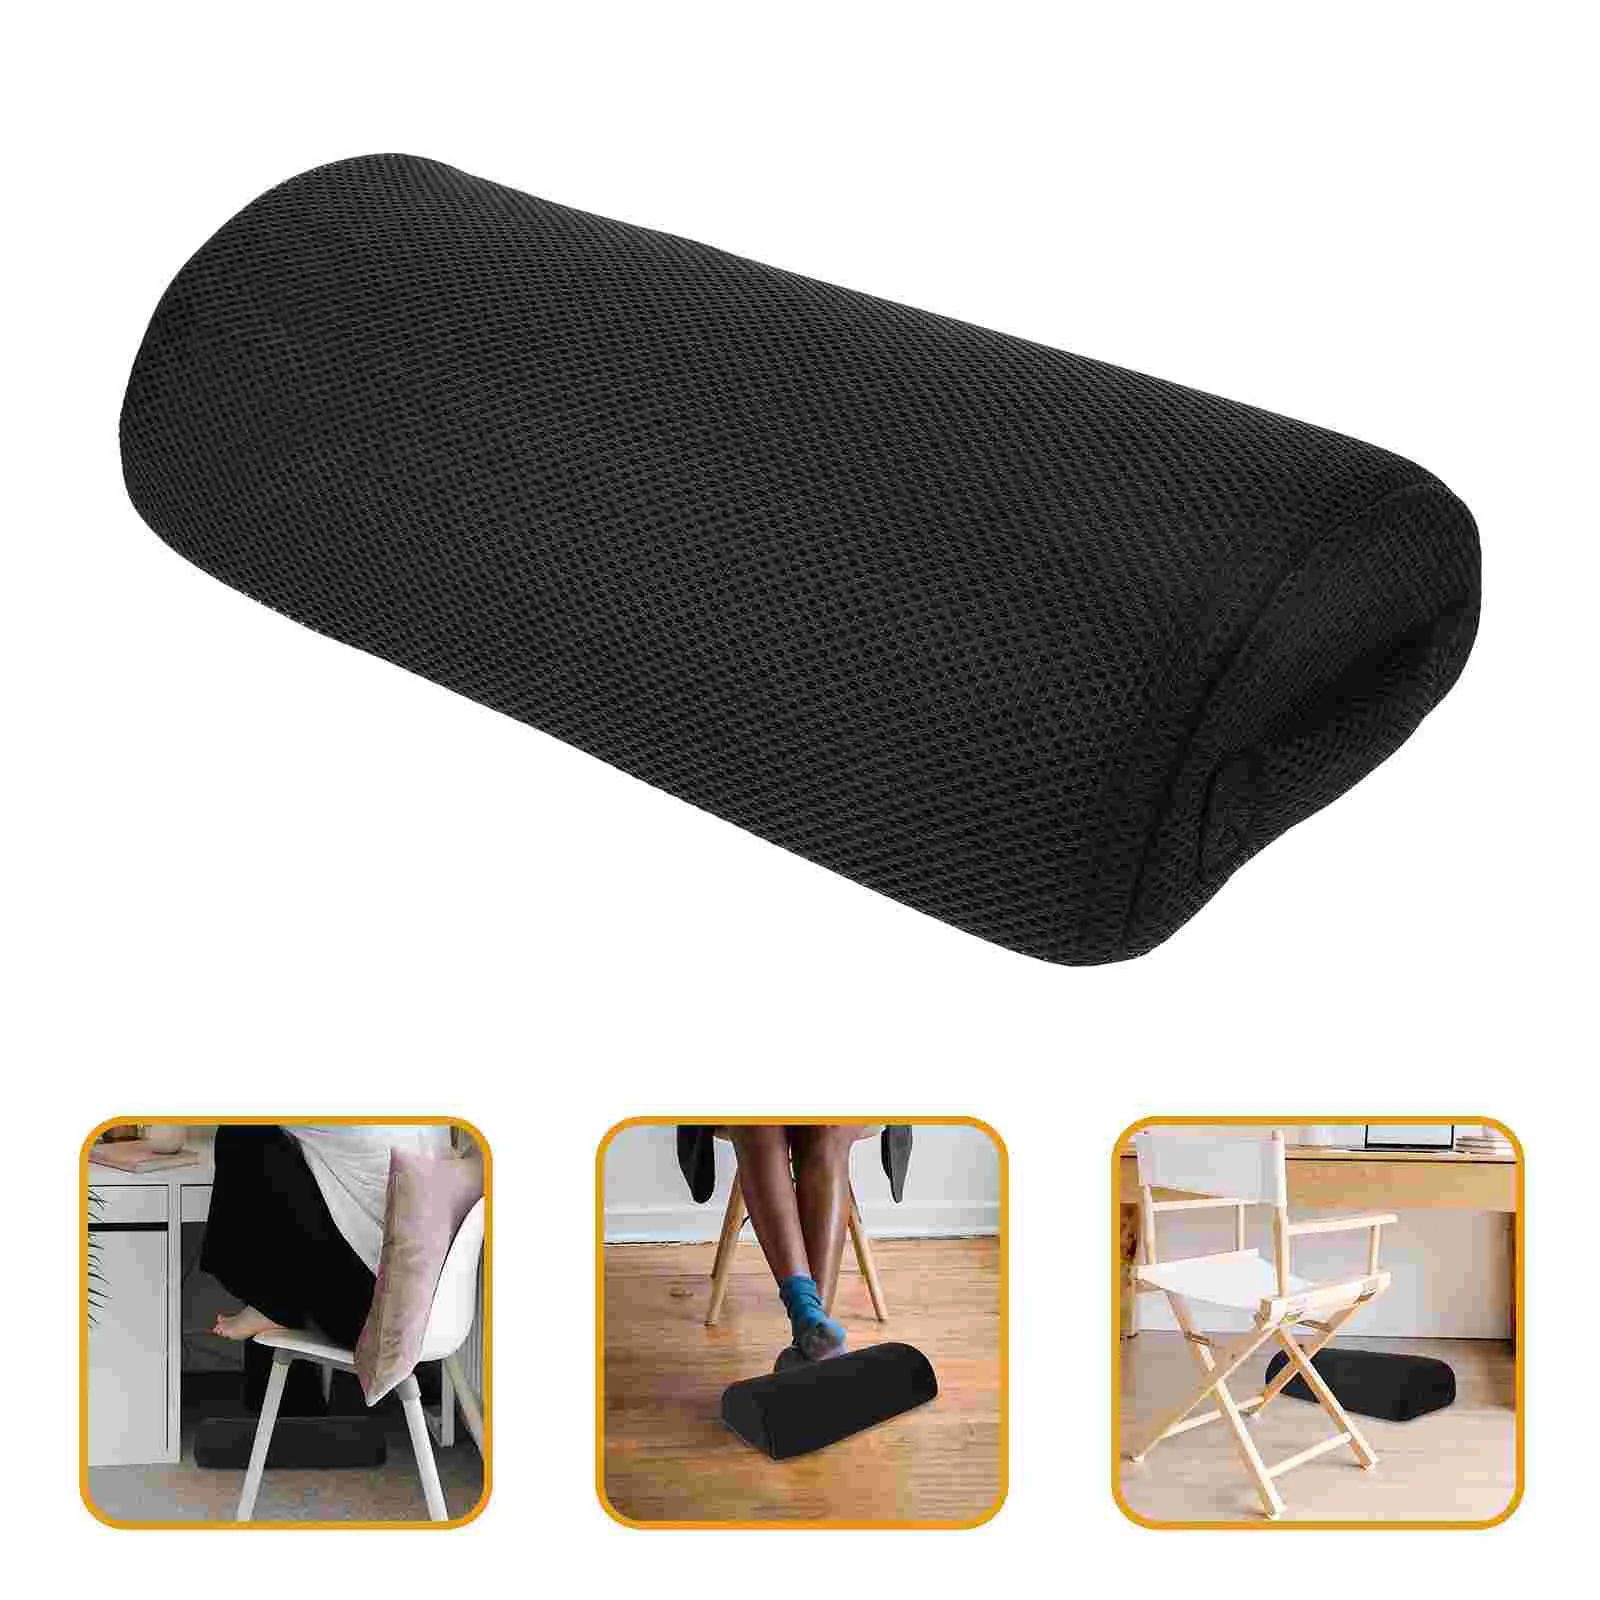 

Household Foot Rest Bed Pillows Office Supplies Leg Raise Sleeping Home Footrest Cushion Support